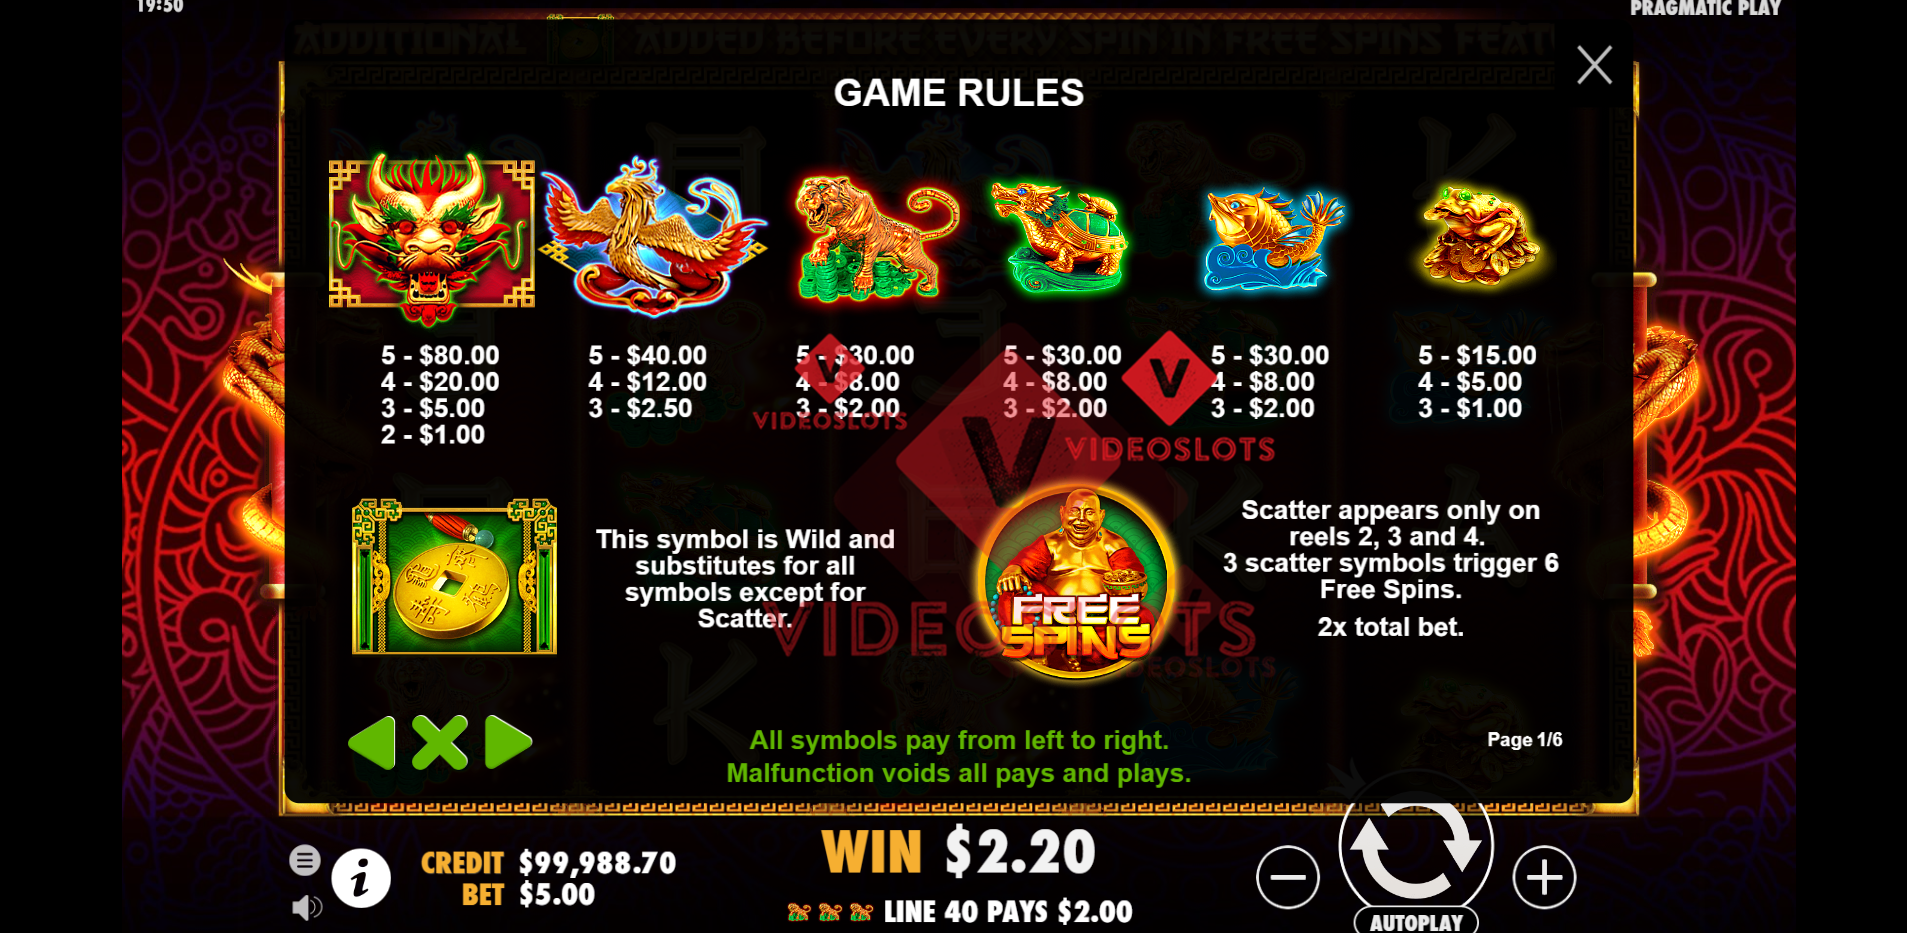 Pay Table for Lucky Dragons slot by Pragmatic Play